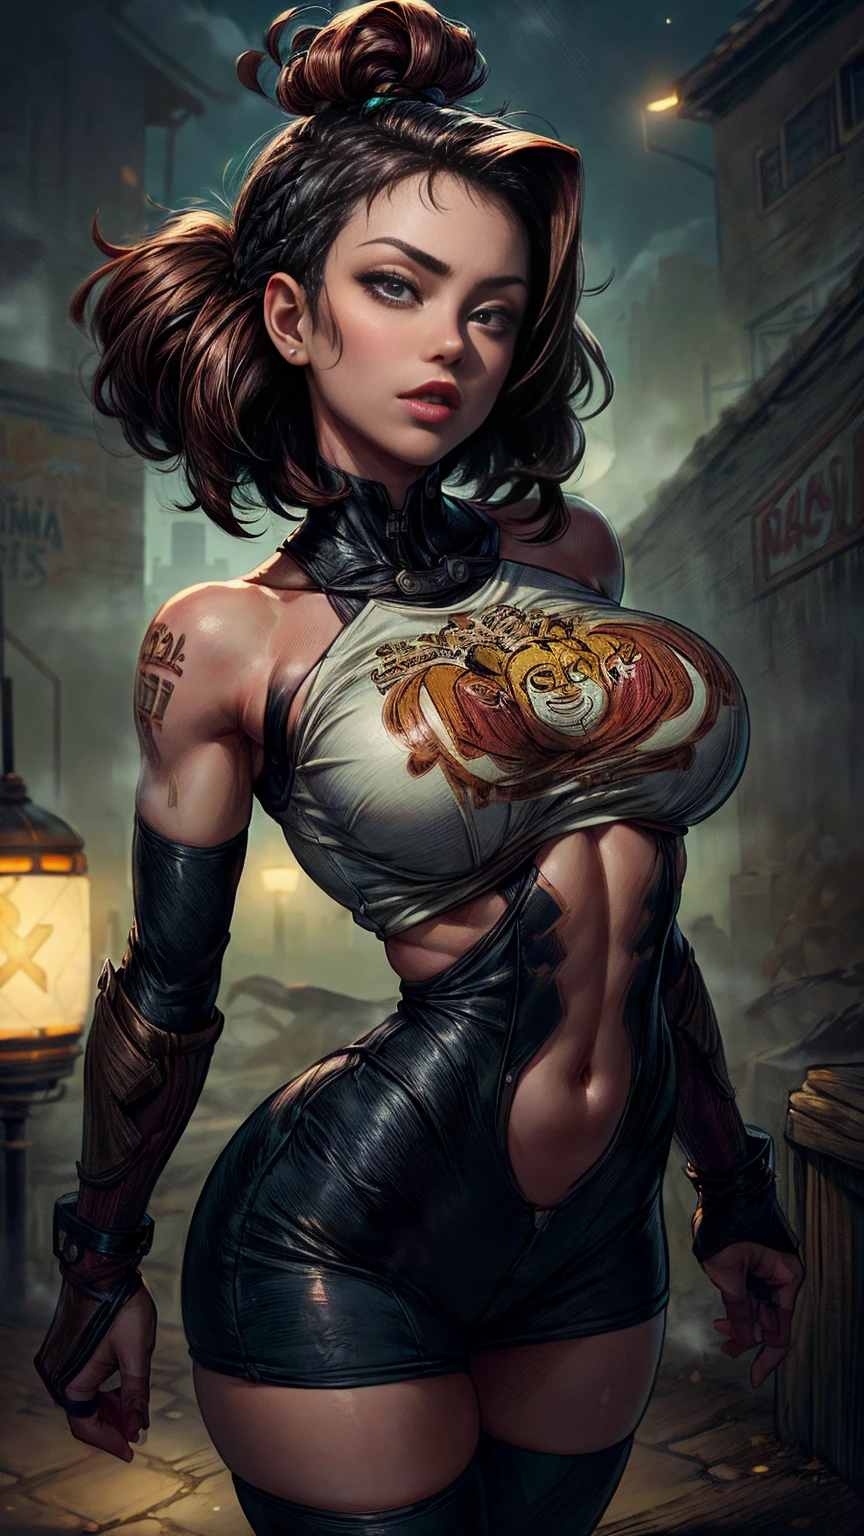 Ultra-realistic CG K ,((premium、8k、32k、Masterpiece、NFFSW:1.3)), (superfine illustration)、(super high resolution), (((adult body))), (((1 girl in))), ((( short hair bob ))), 25 year old cyberpunk gladiator with perfect body, Shoulder pads with metal spikes., Gladiadores in Brooklyn, (( short hair bob )), Torn rugby team t-shirt, Almost naked in the wild urban style of Simon Bisley, short blonde hair, minimal clothing, Metallic protection on the left arm with complex graphics...., Dark red with white stars and blue and white stripes.,(( dynamic action pose:1.5)), armor, Full of spikes and rivets., poison tattoo (((Image from the knee up))), short white blonde hair, In the background、 There is a wall with an intricate design painted by Shepard Fairey....